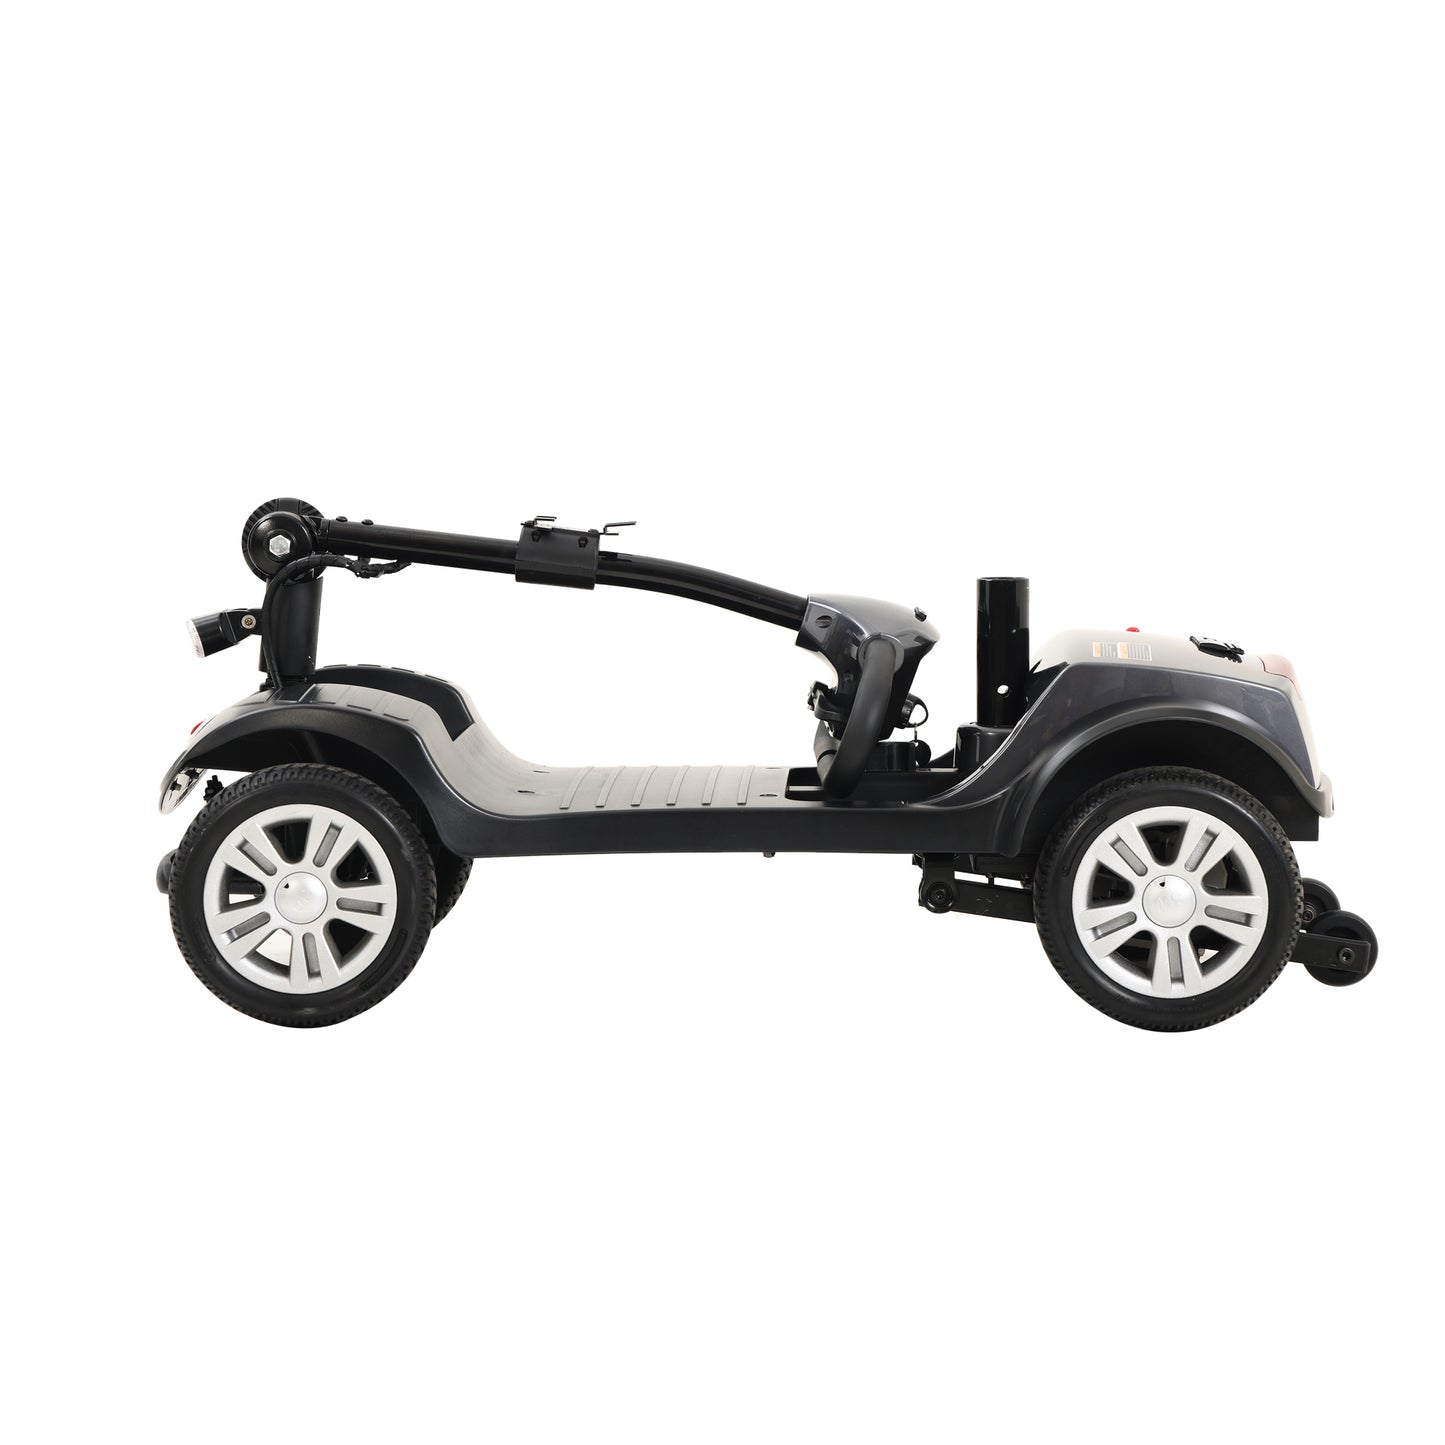 Four wheels Compact Travel Mobility Scooter with 300W Motor for Adult-300lbs, Metallic Gray